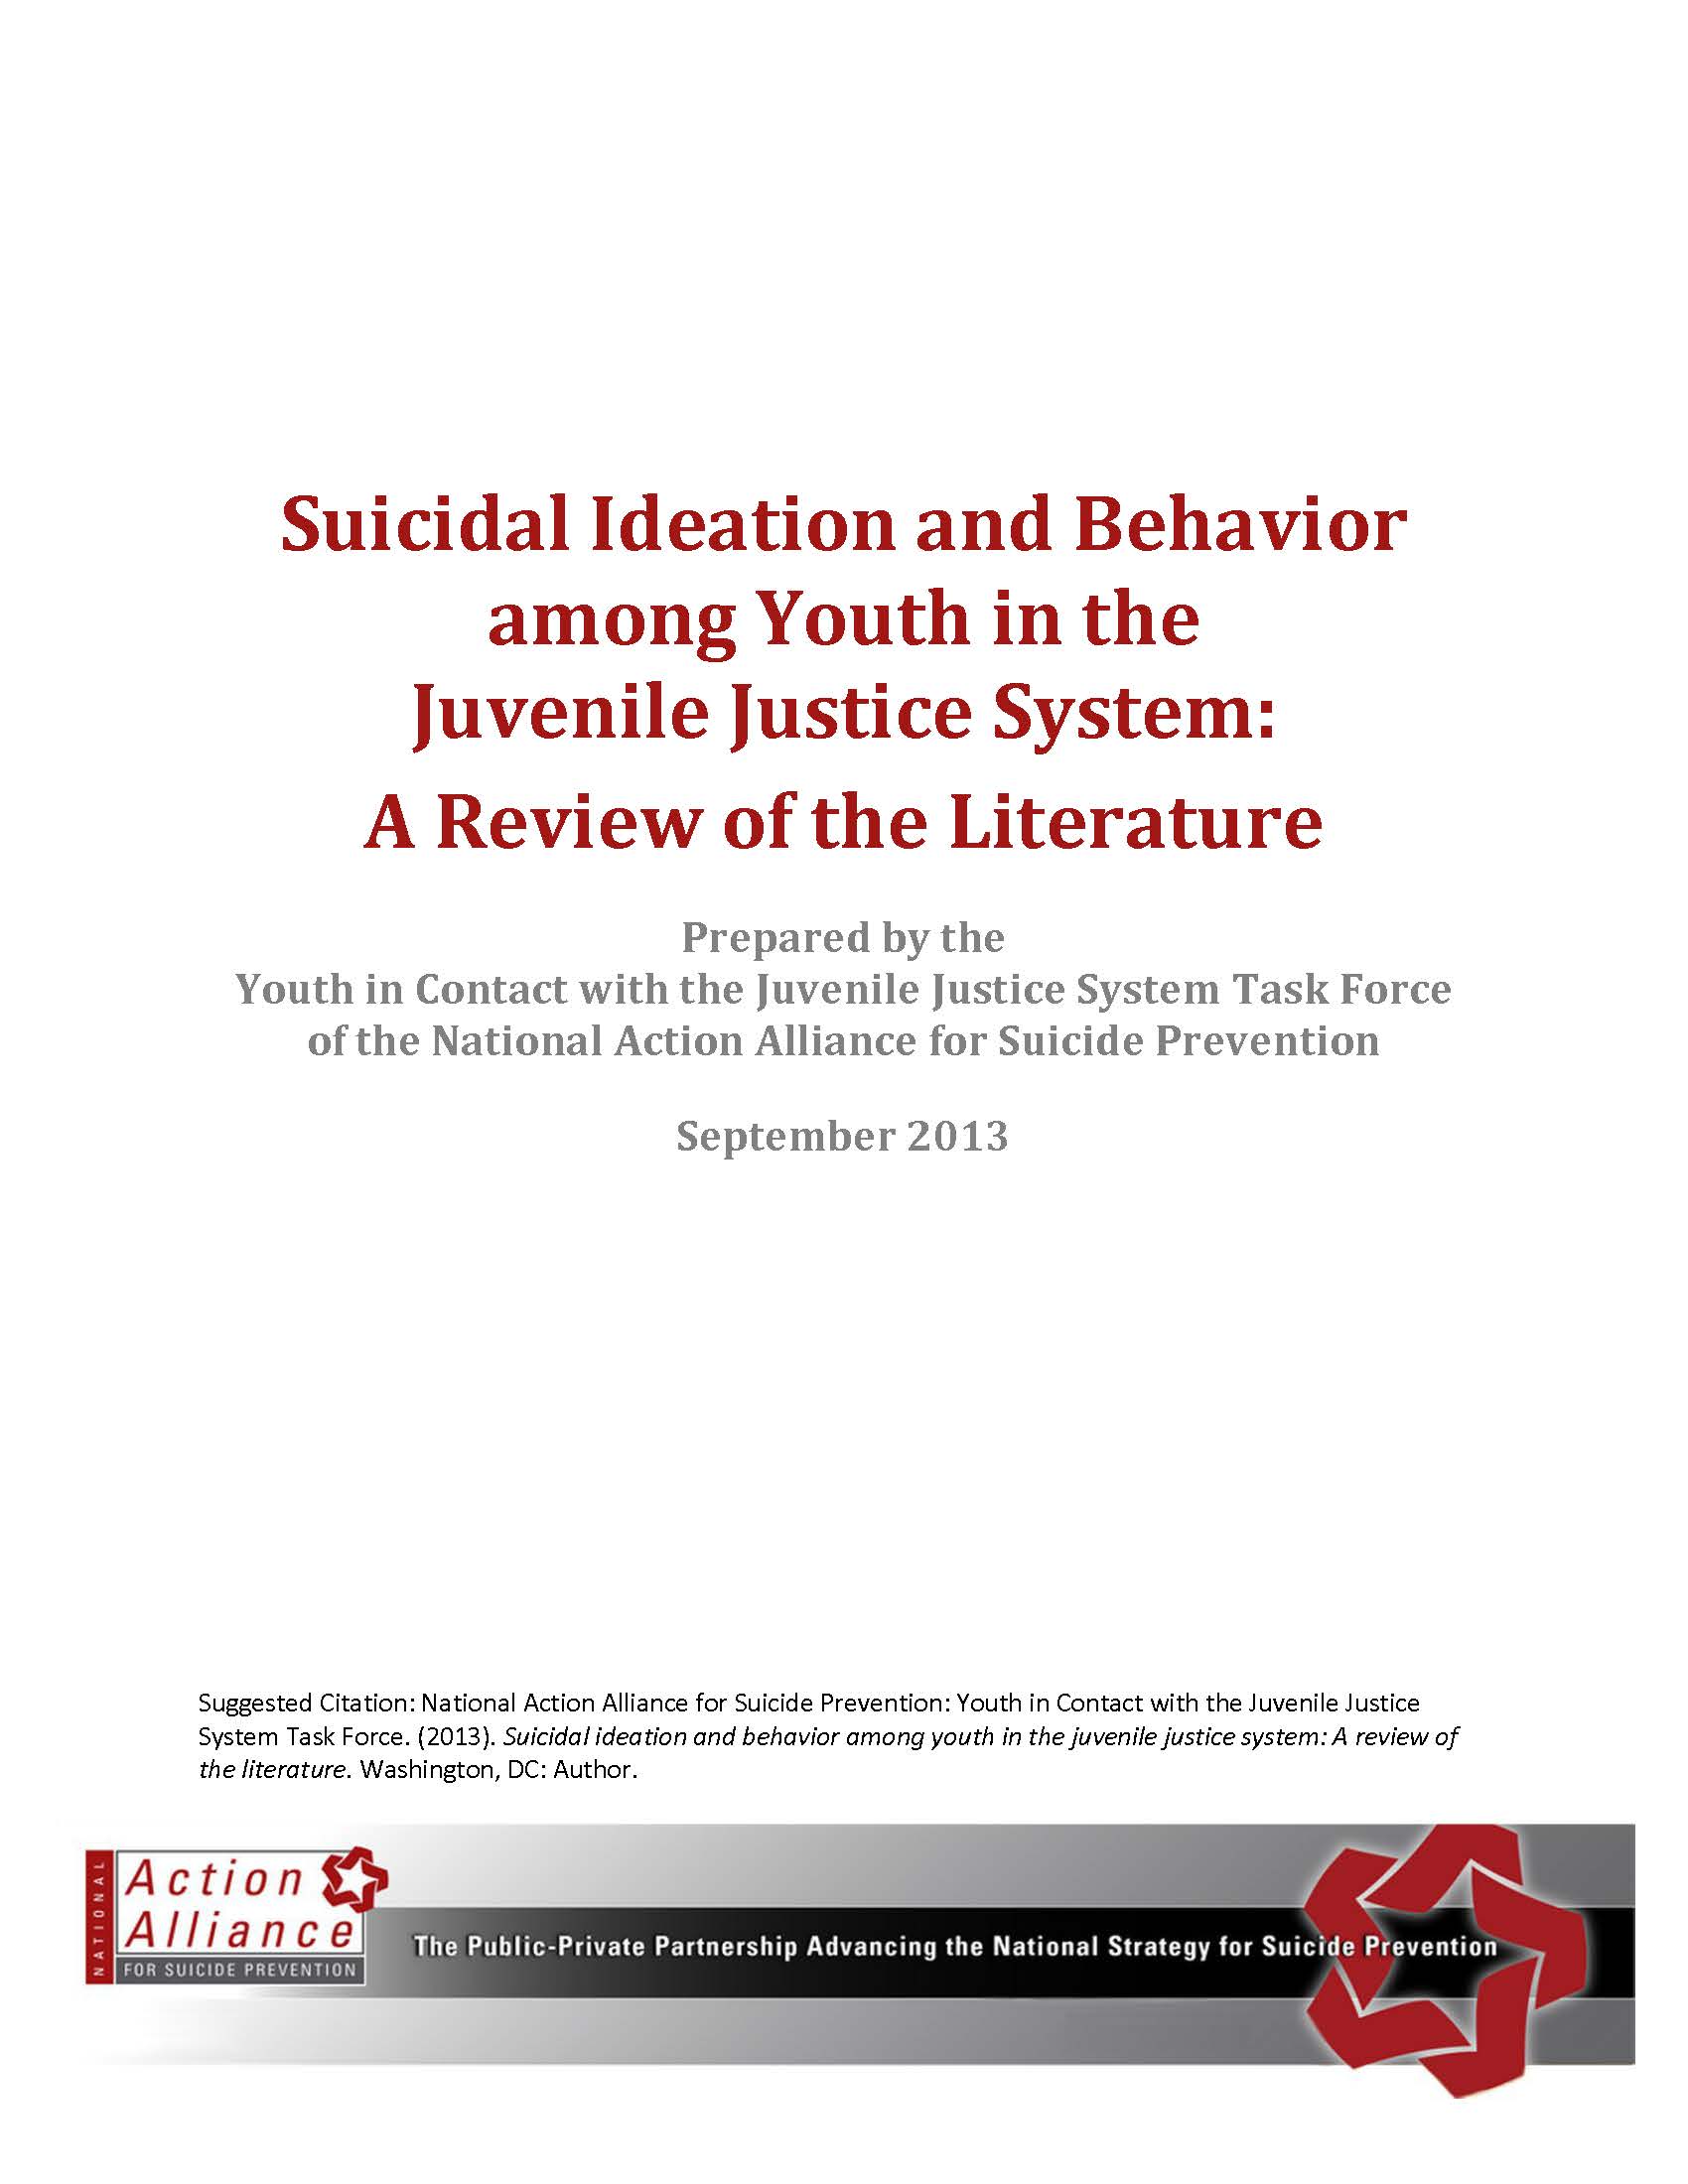 Suicide Ideation and Behavior among Youth in the Juvenile Justice System: A Review of the Literature